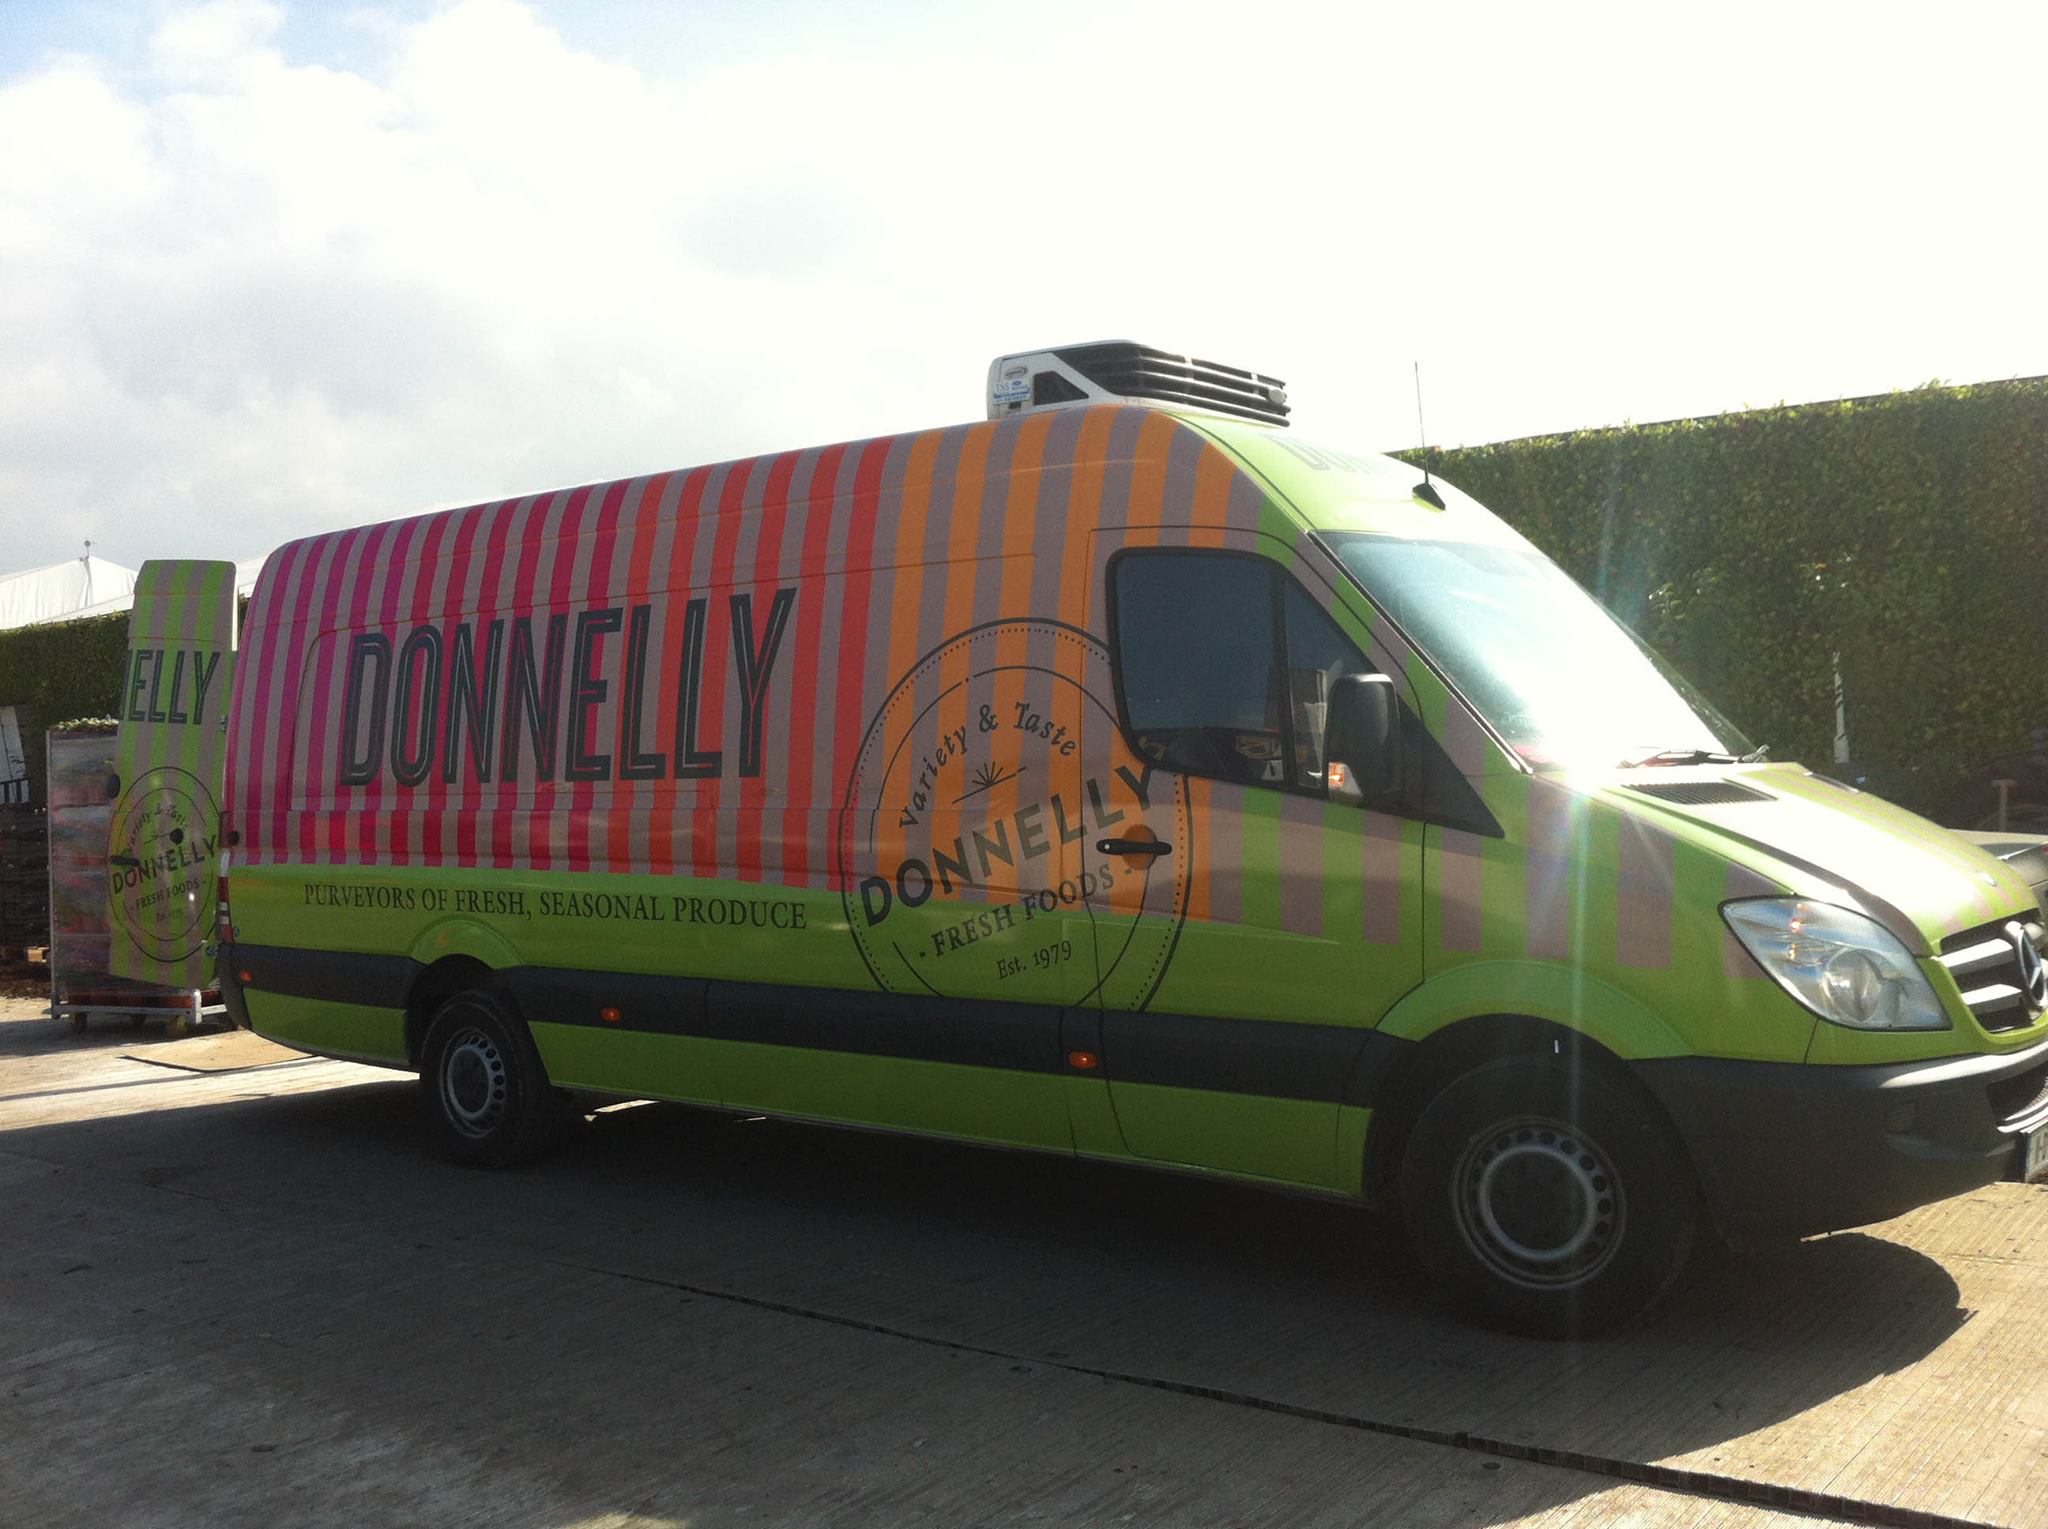 Donnelly Fruit & Veg has announced that it will be seeking up to 98 redundancies